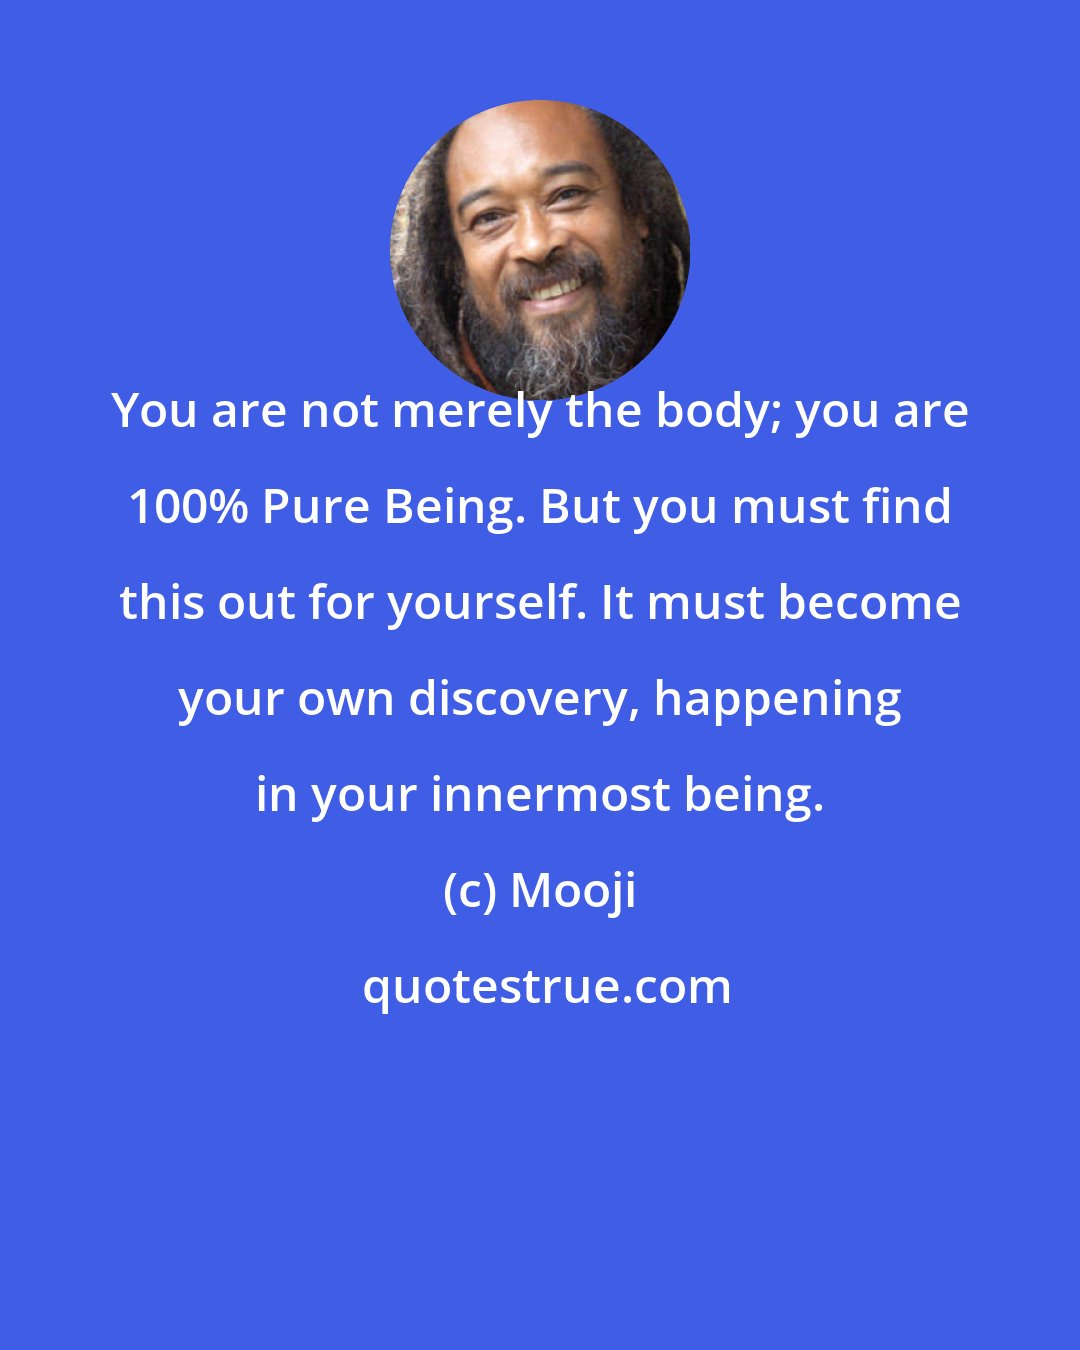 Mooji: You are not merely the body; you are 100% Pure Being. But you must find this out for yourself. It must become your own discovery, happening in your innermost being.